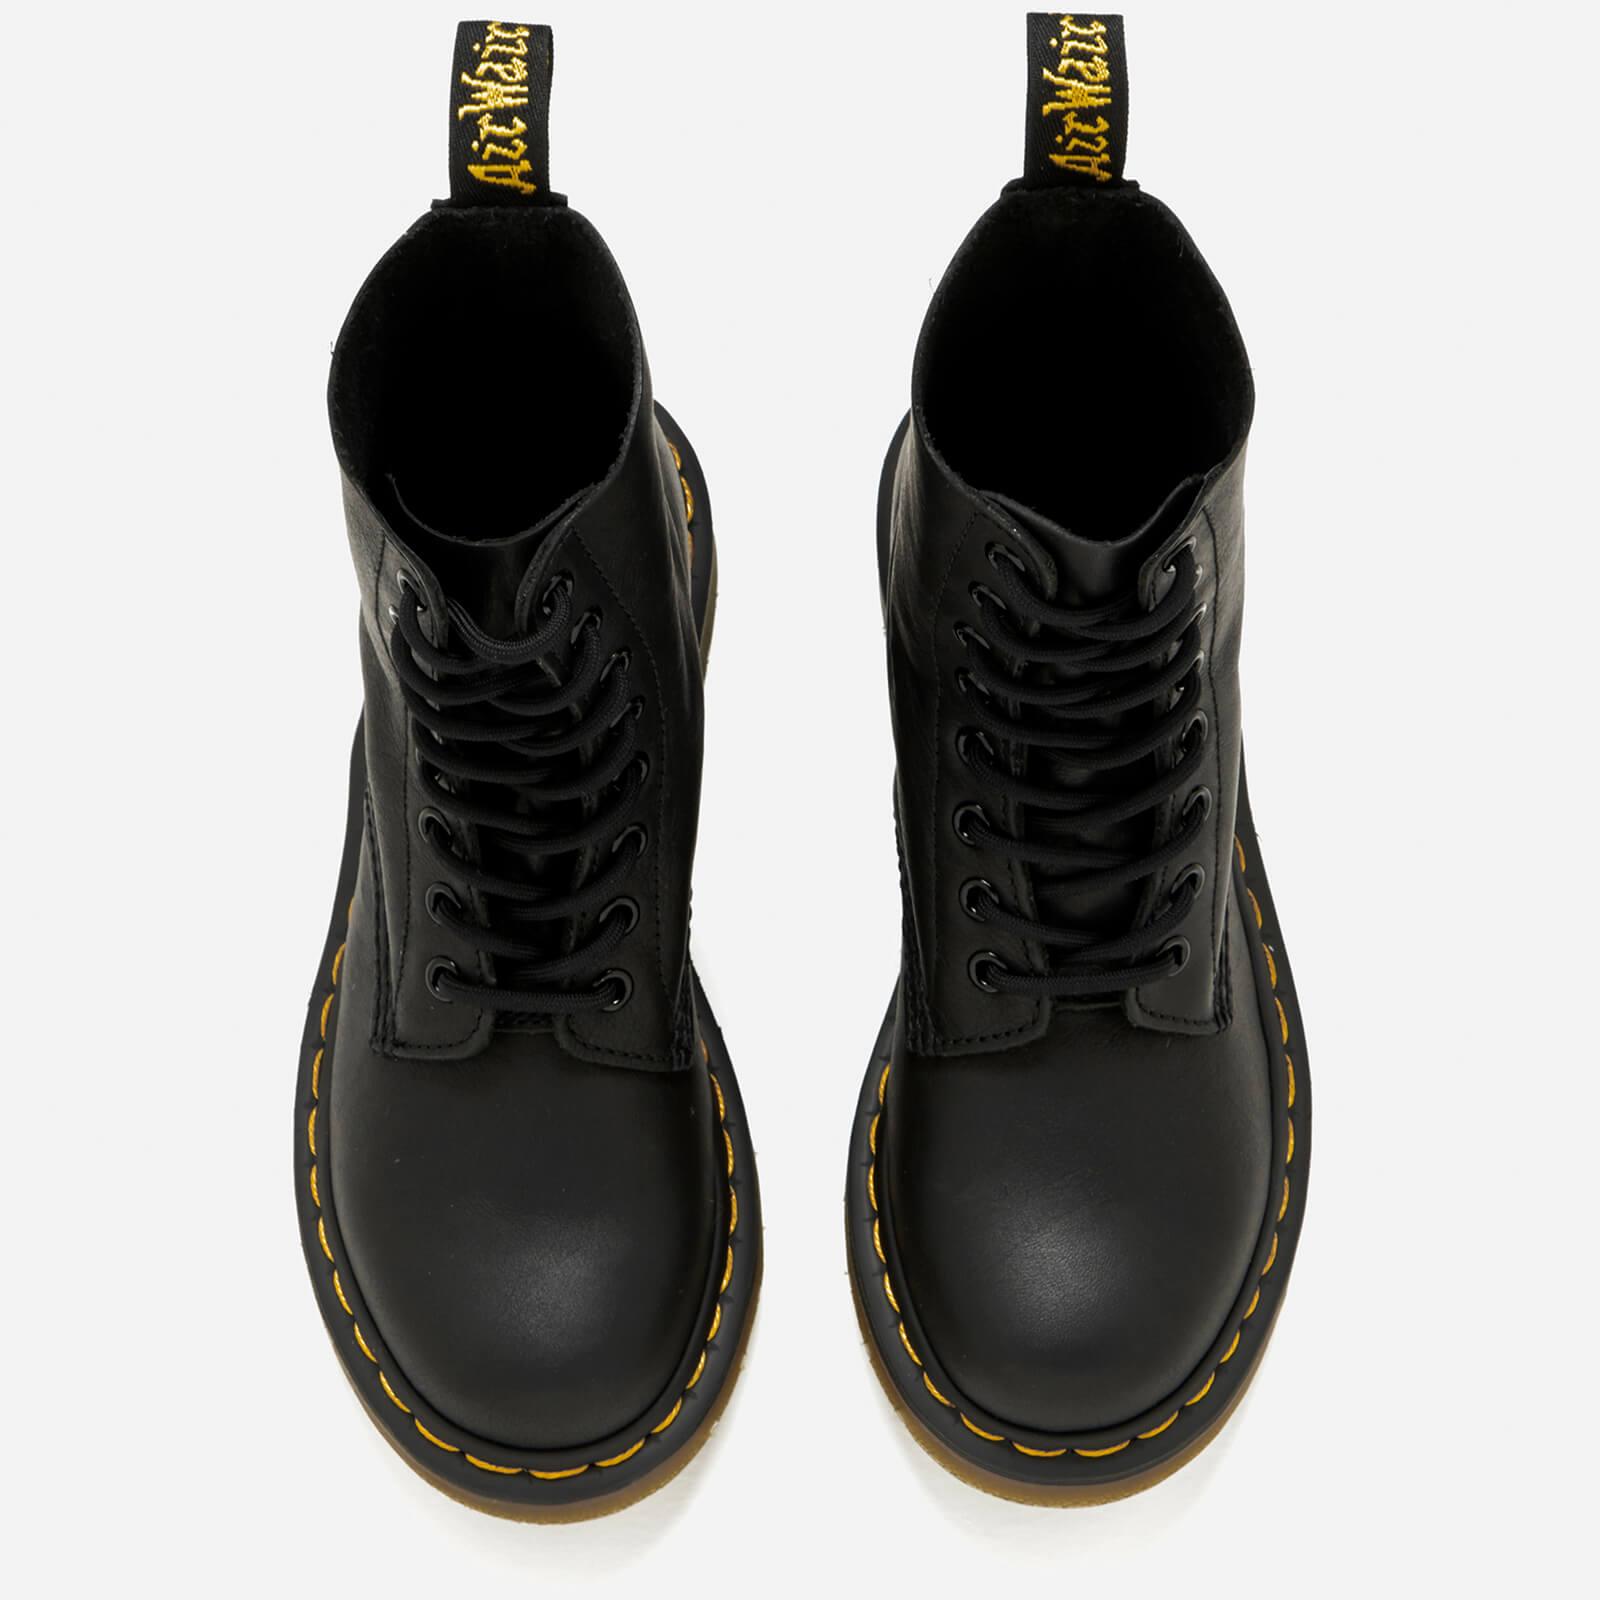 Dr. Martens 1460 Pascal Virginia Leather 8-eye Boots in Black | Lyst